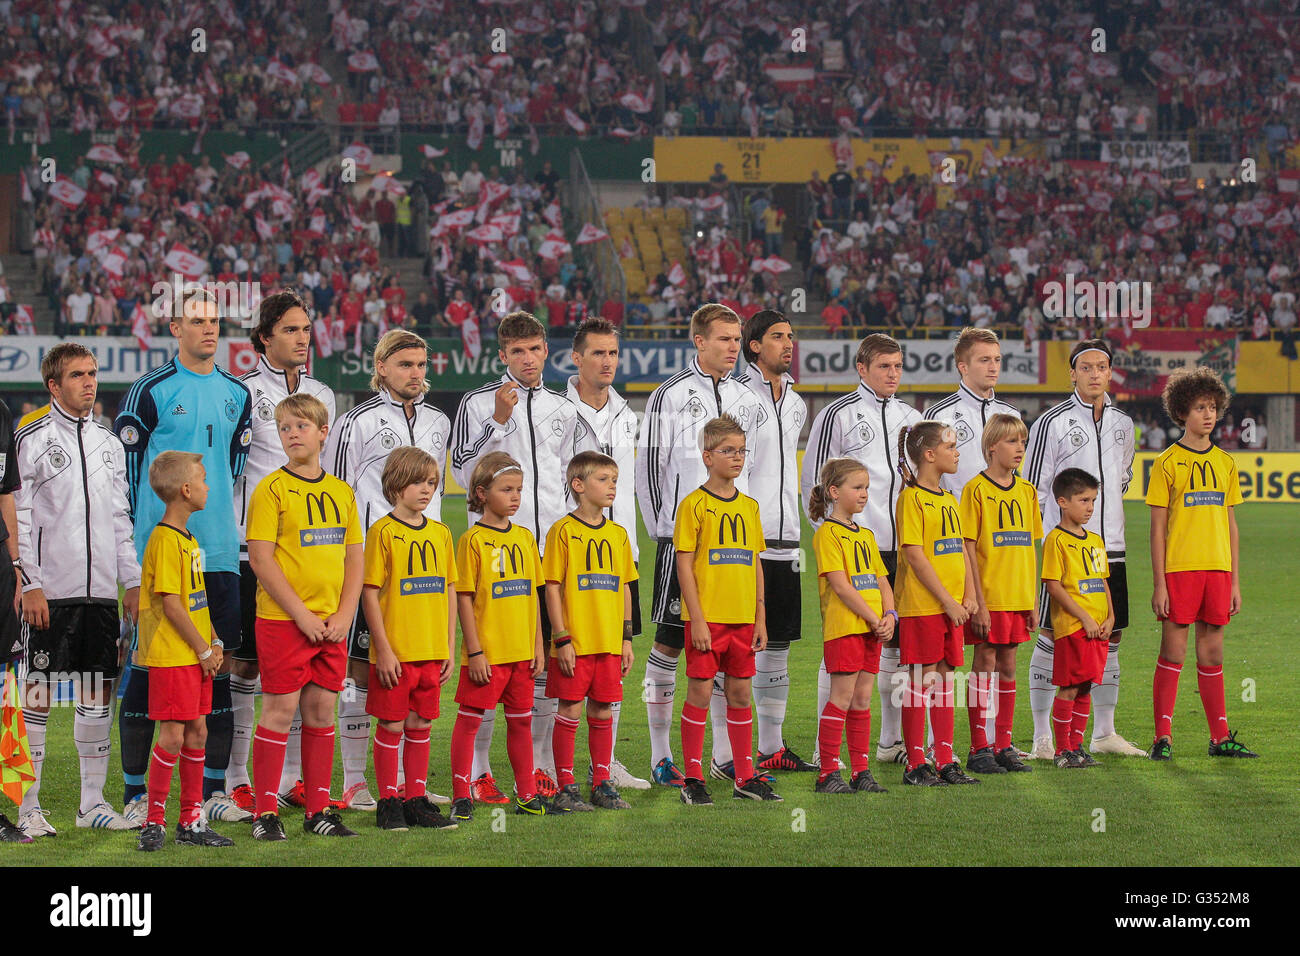 The German team during the national anthem before the WC qualifier soccer game on September 11, 2012 in Vienna, Austria, Europe Stock Photo